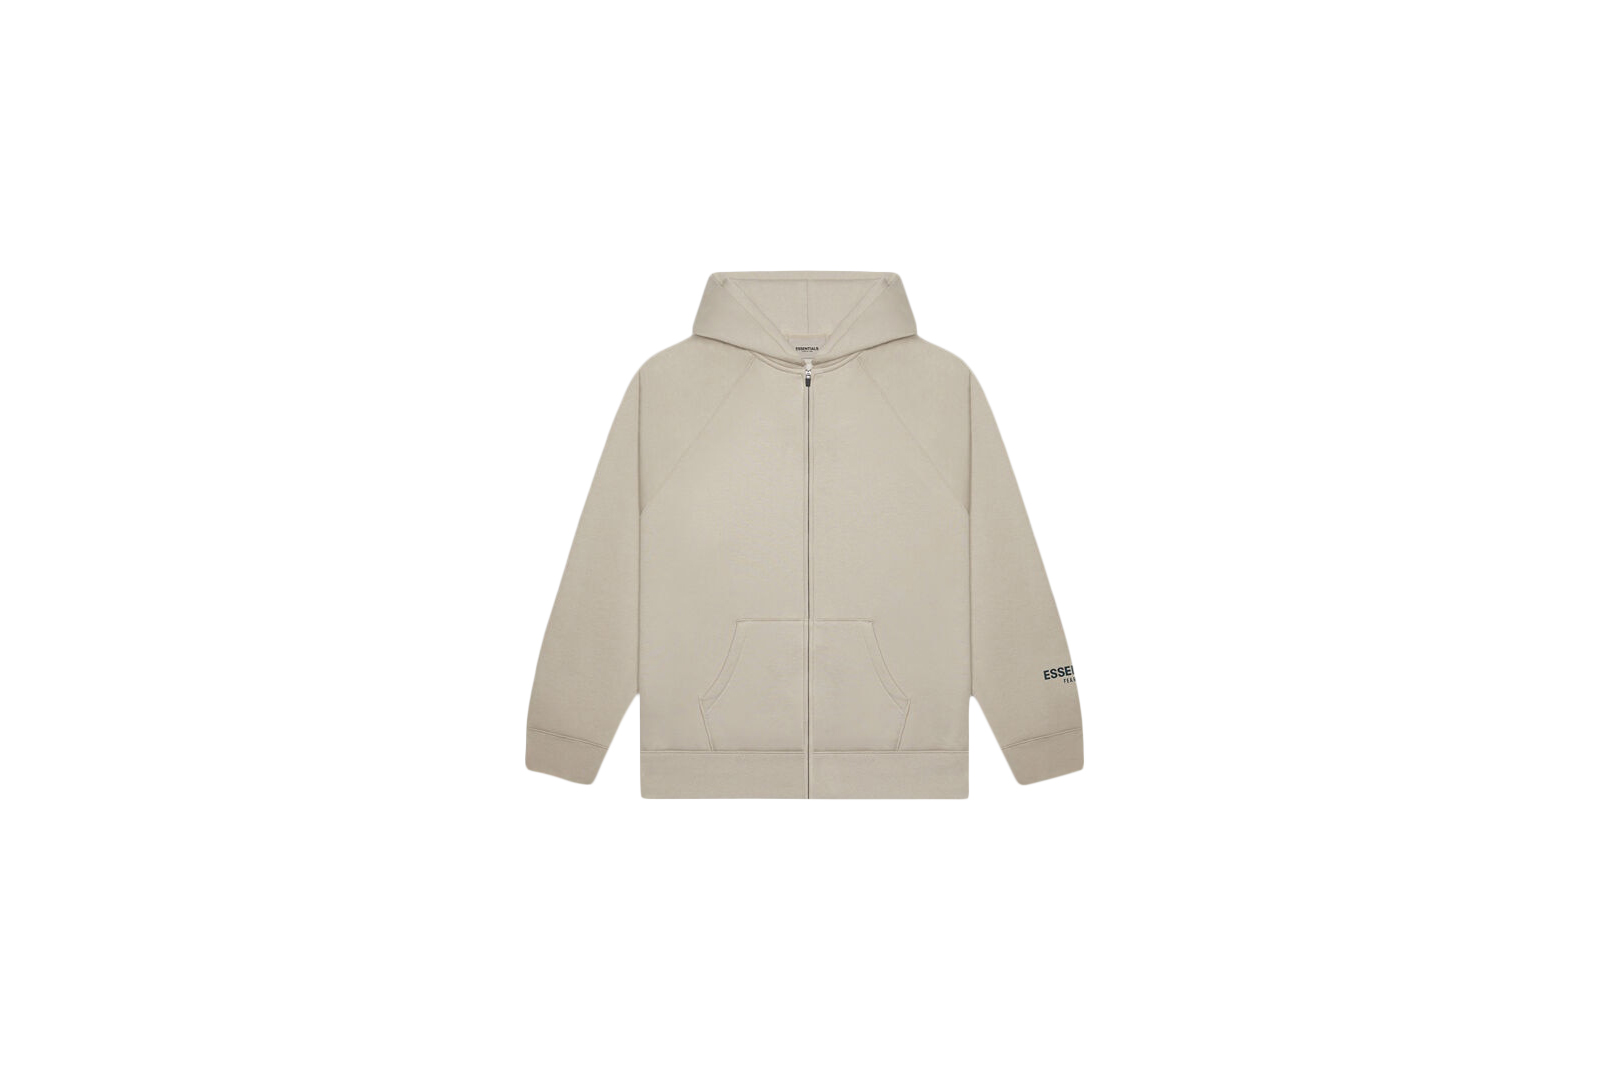 Fear of God Essentials 3D Silicon Applique Full Zip Up Hoodie